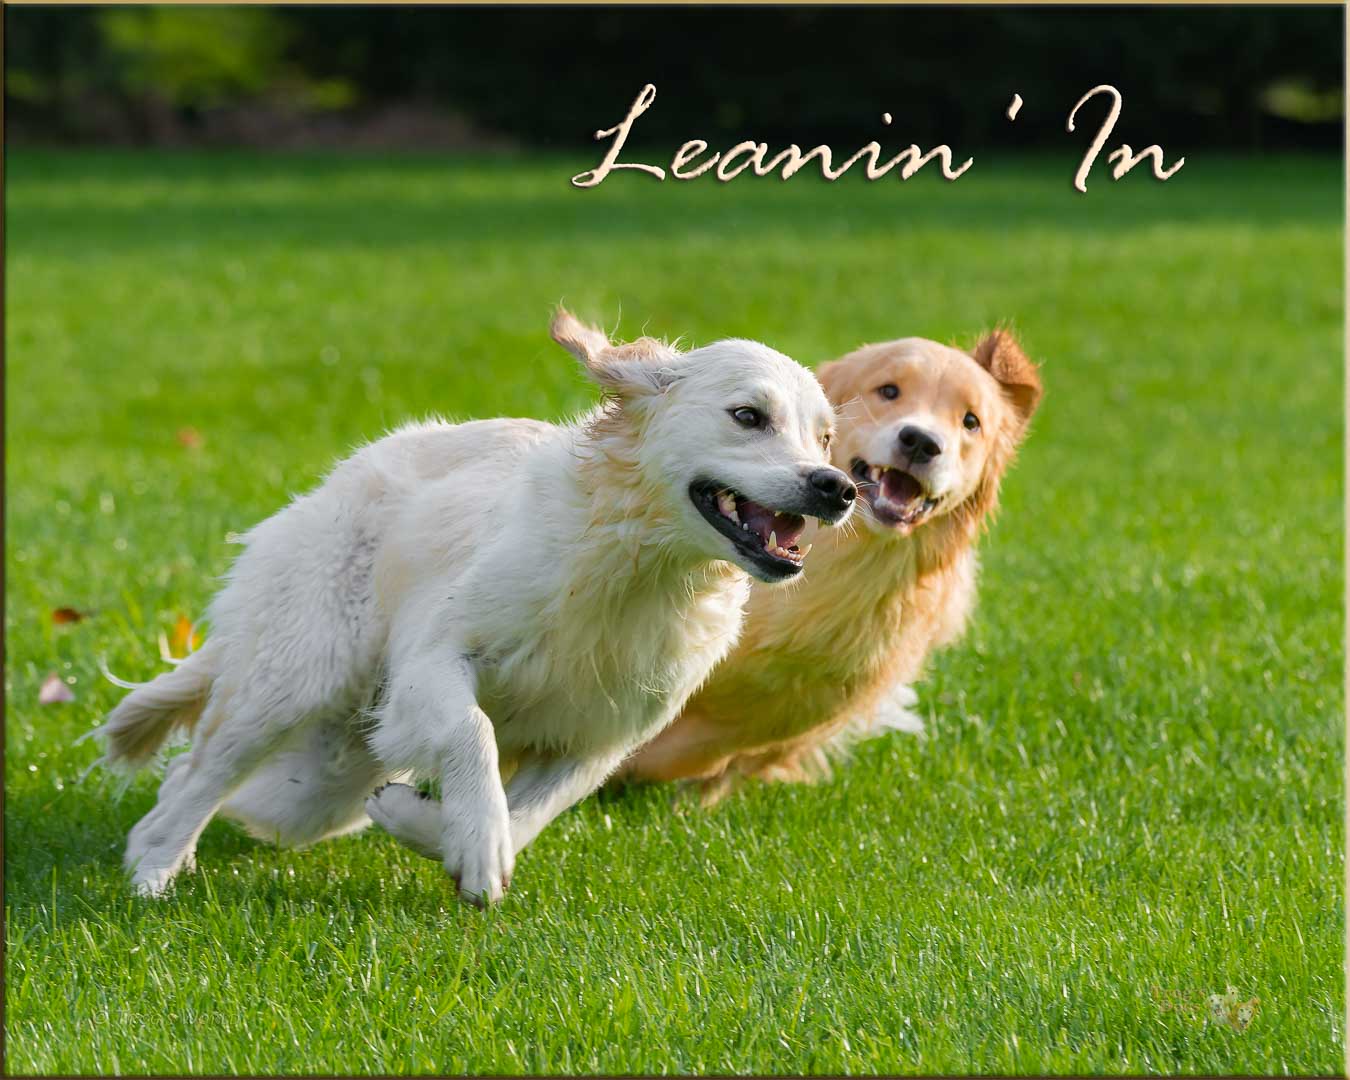 Two Golden Retrievers leaning in while running